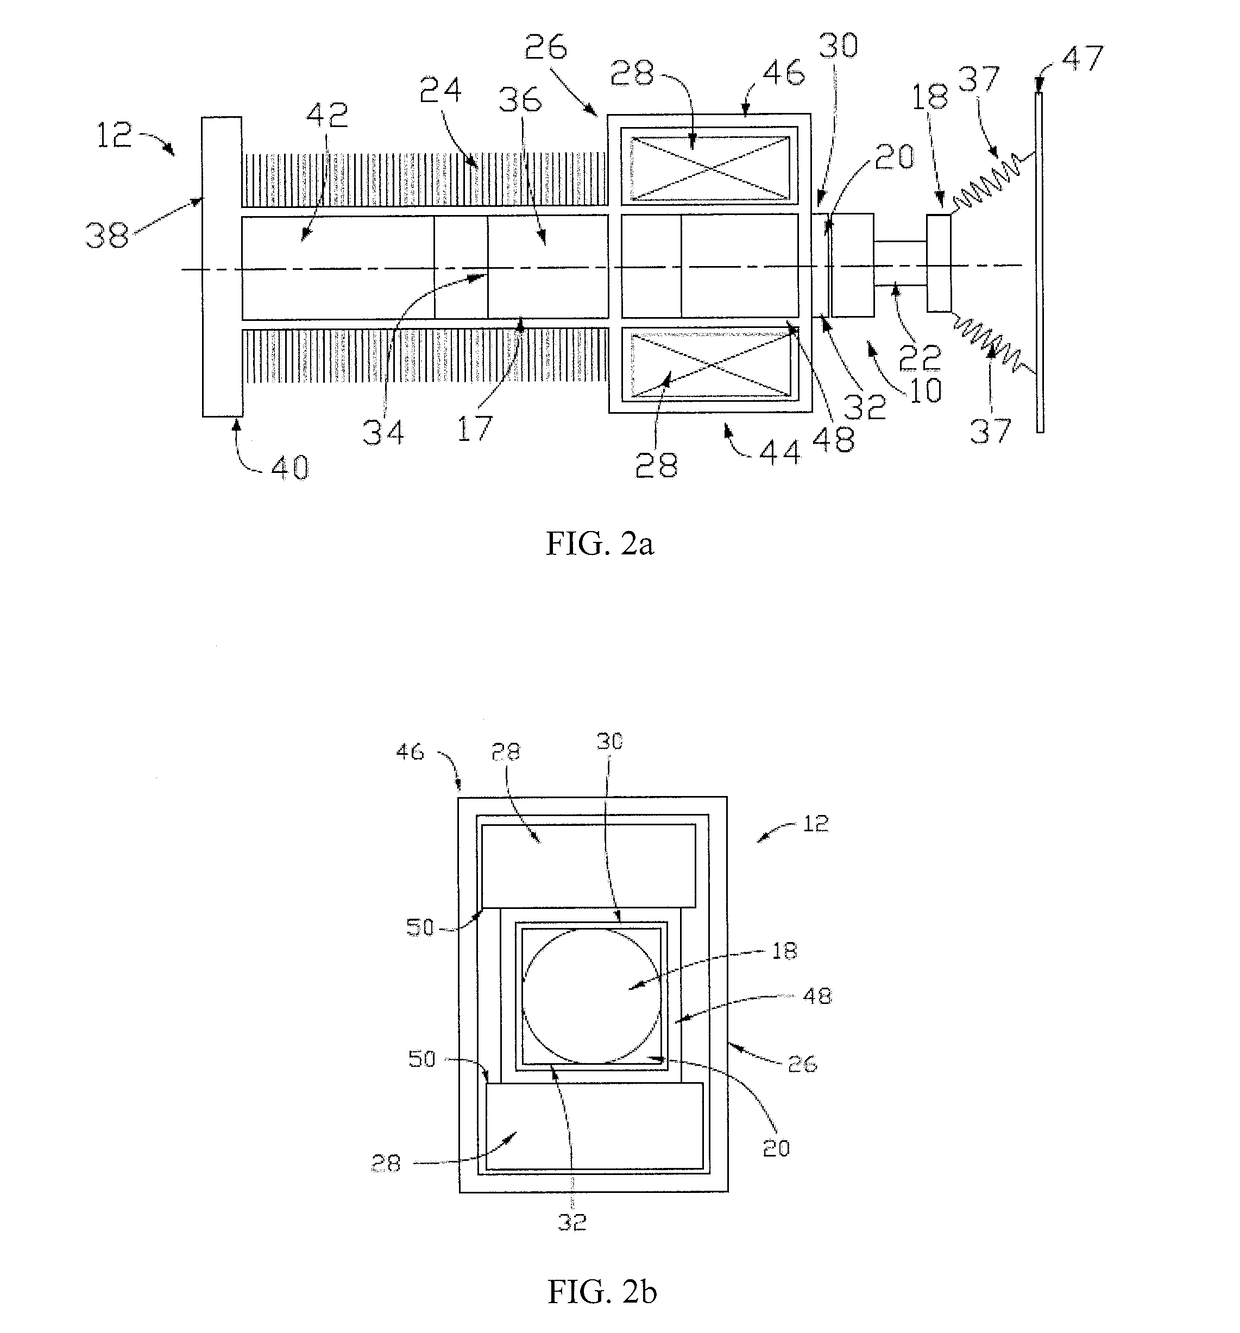 Plunger for magnetic latching solenoid actuator